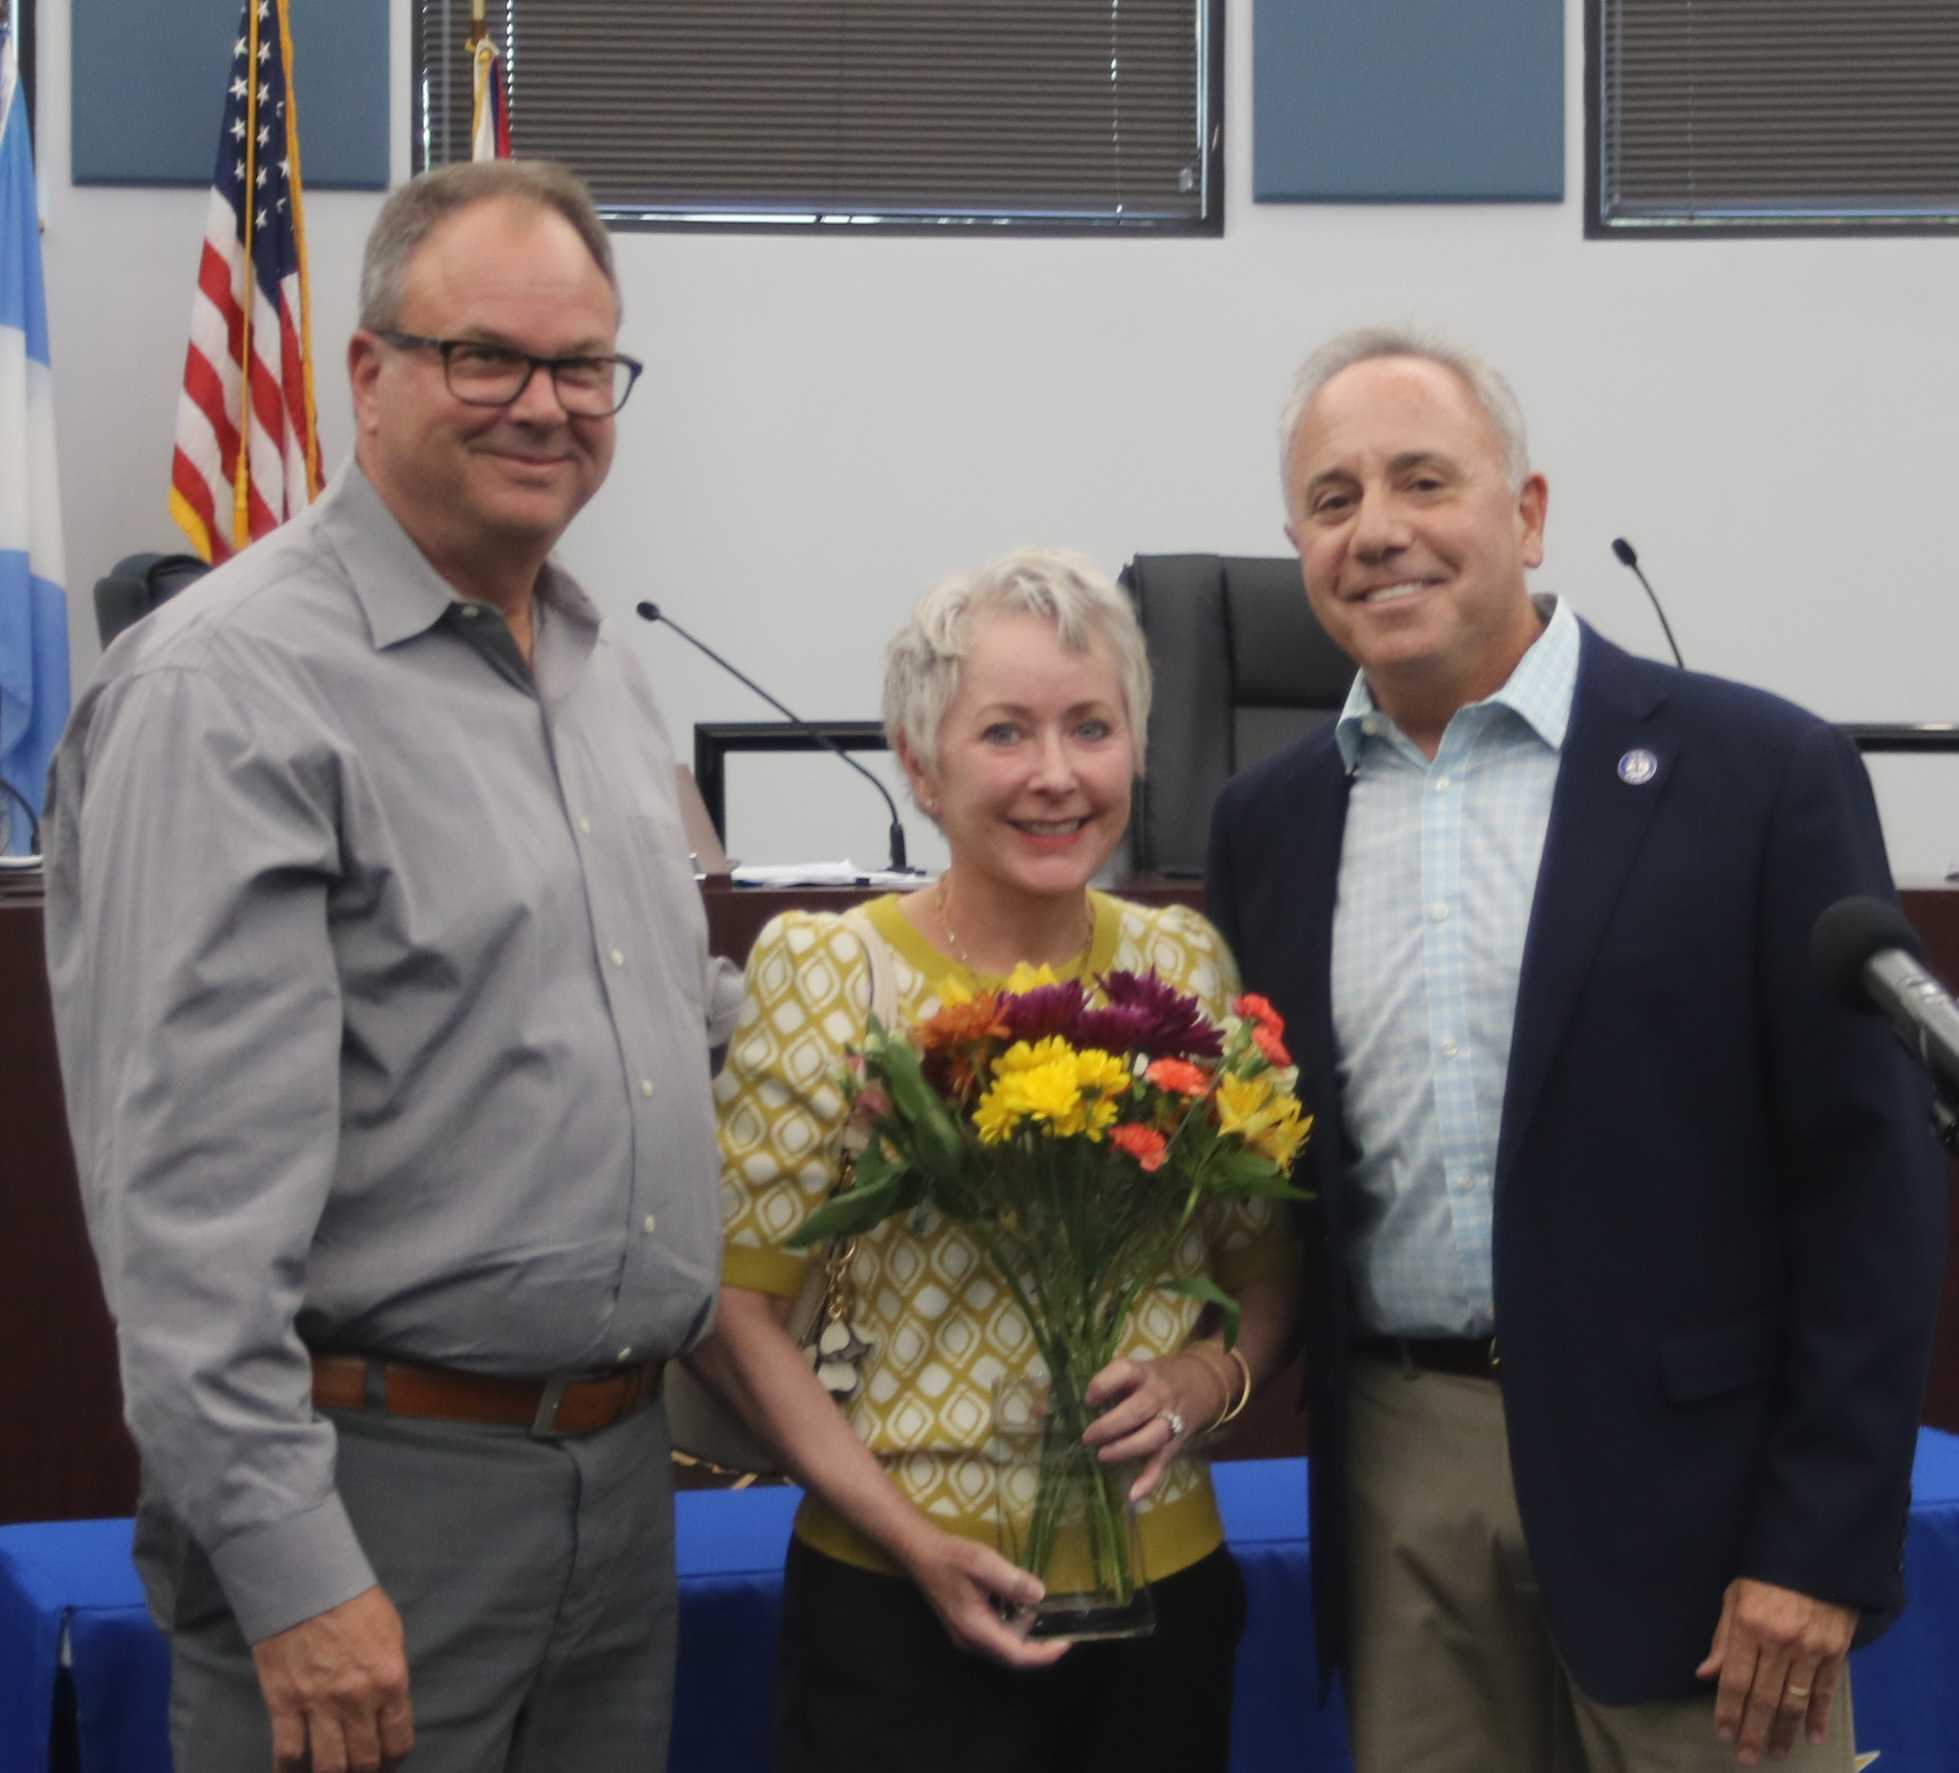 Mr. and Mrs. Nagel with flowers and Mayor Sirkin